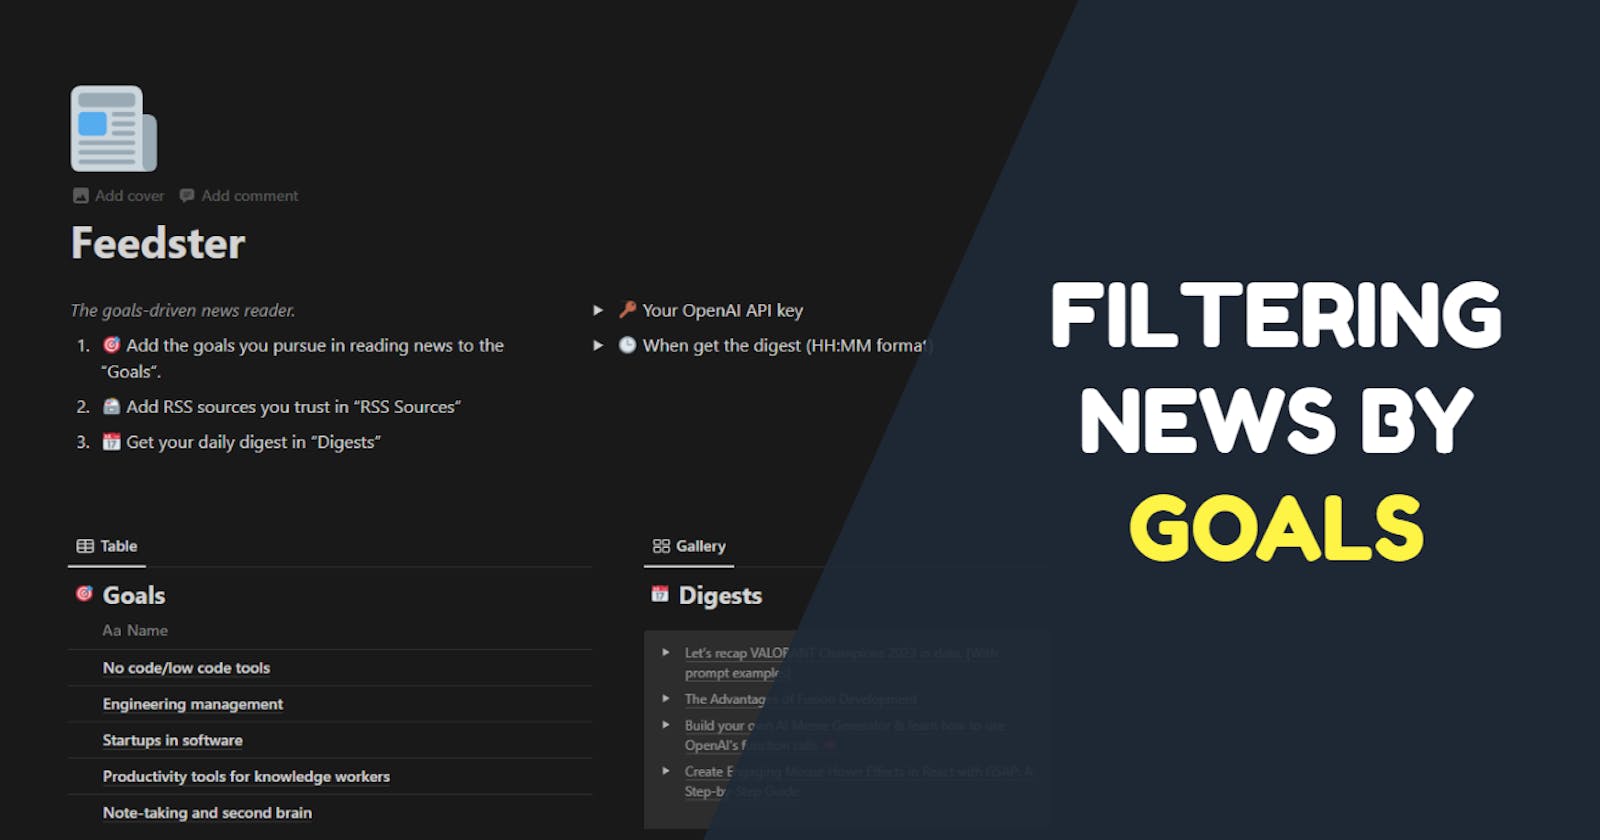 Feedster: How to filter news by goals